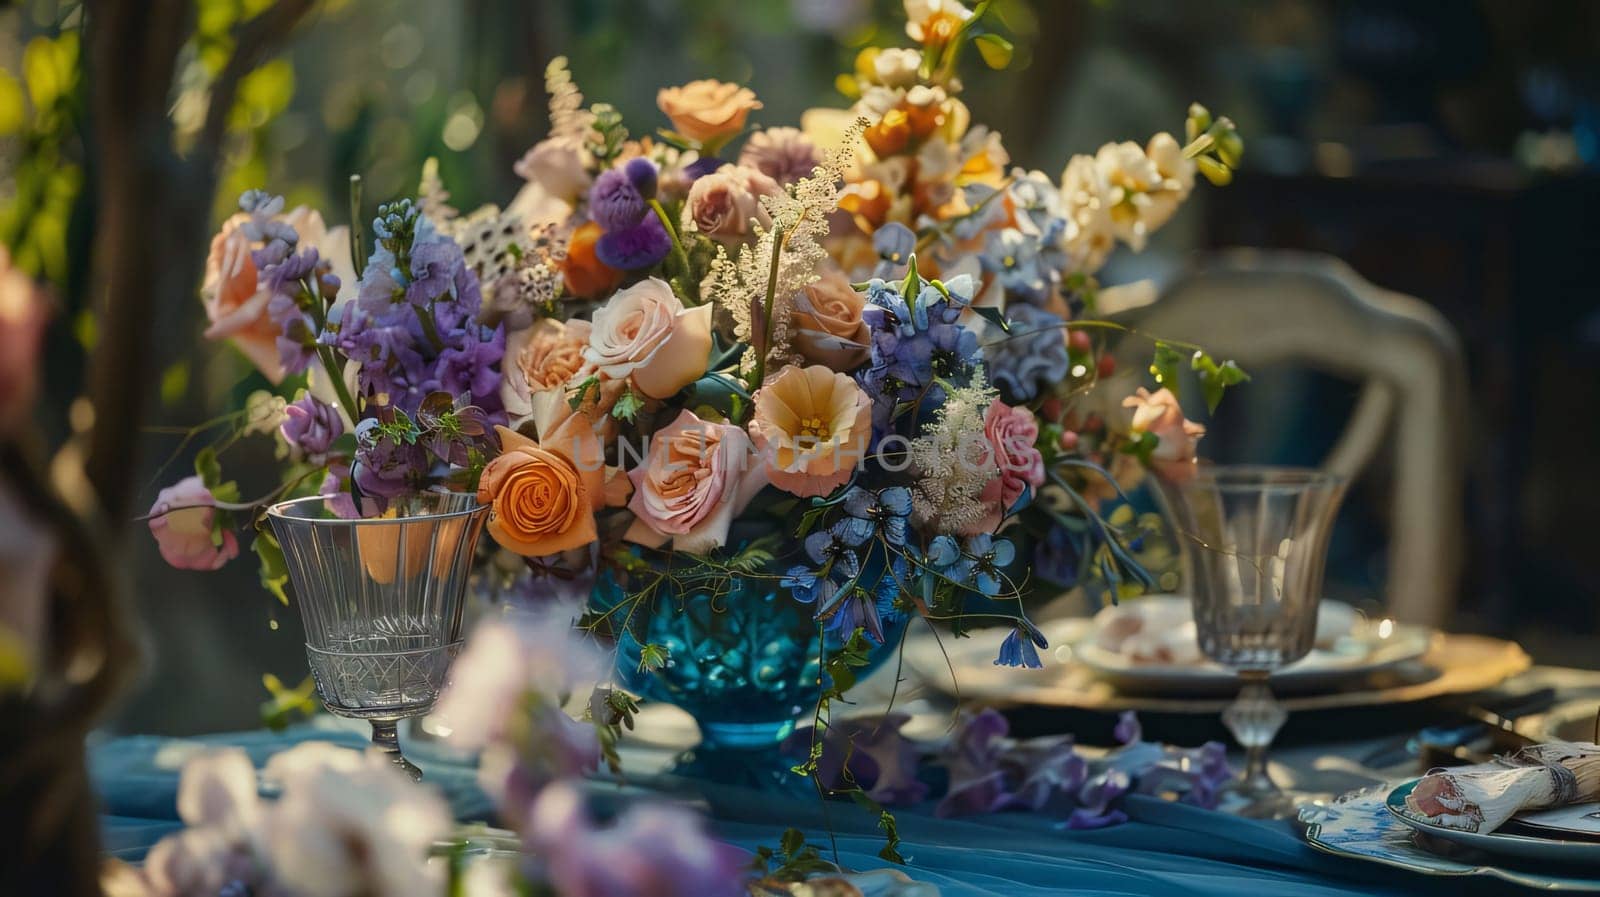 A bouquet of colorful flowers on the table around the plates glasses. Flowering flowers, a symbol of spring, new life. A joyful time of nature waking up to life.